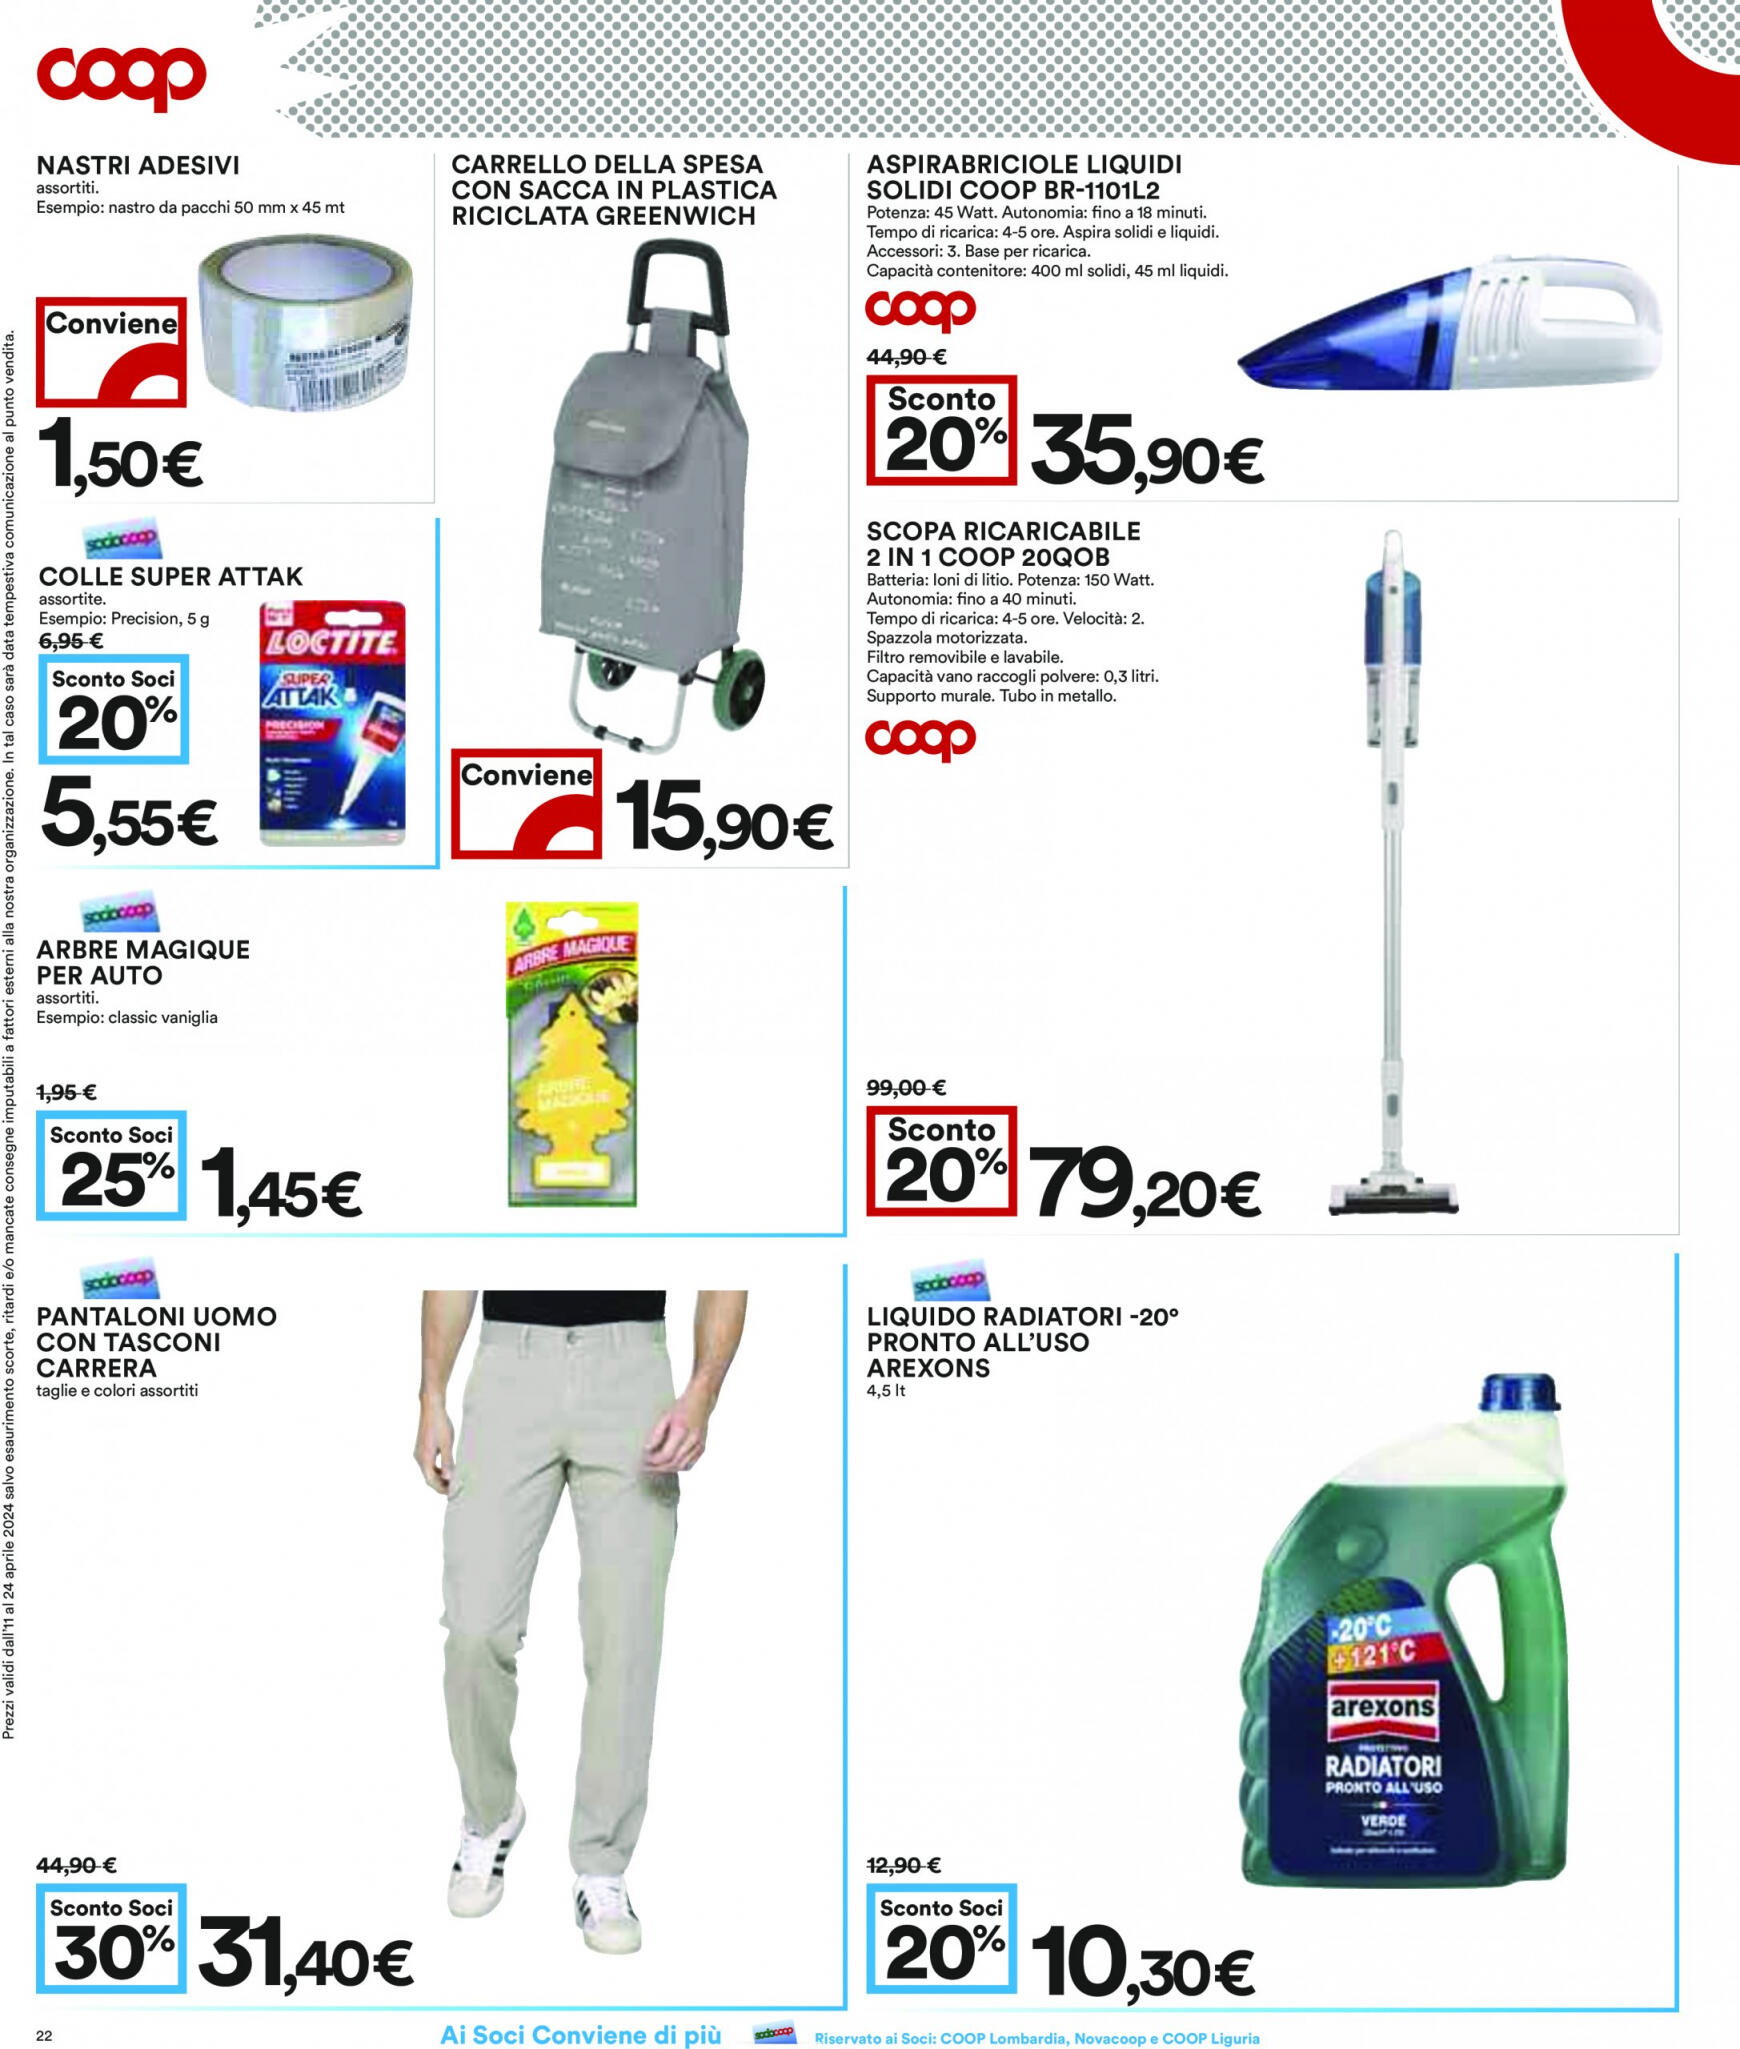 coop - Nuovo volantino Coop 11.04. - 24.04. - page: 22